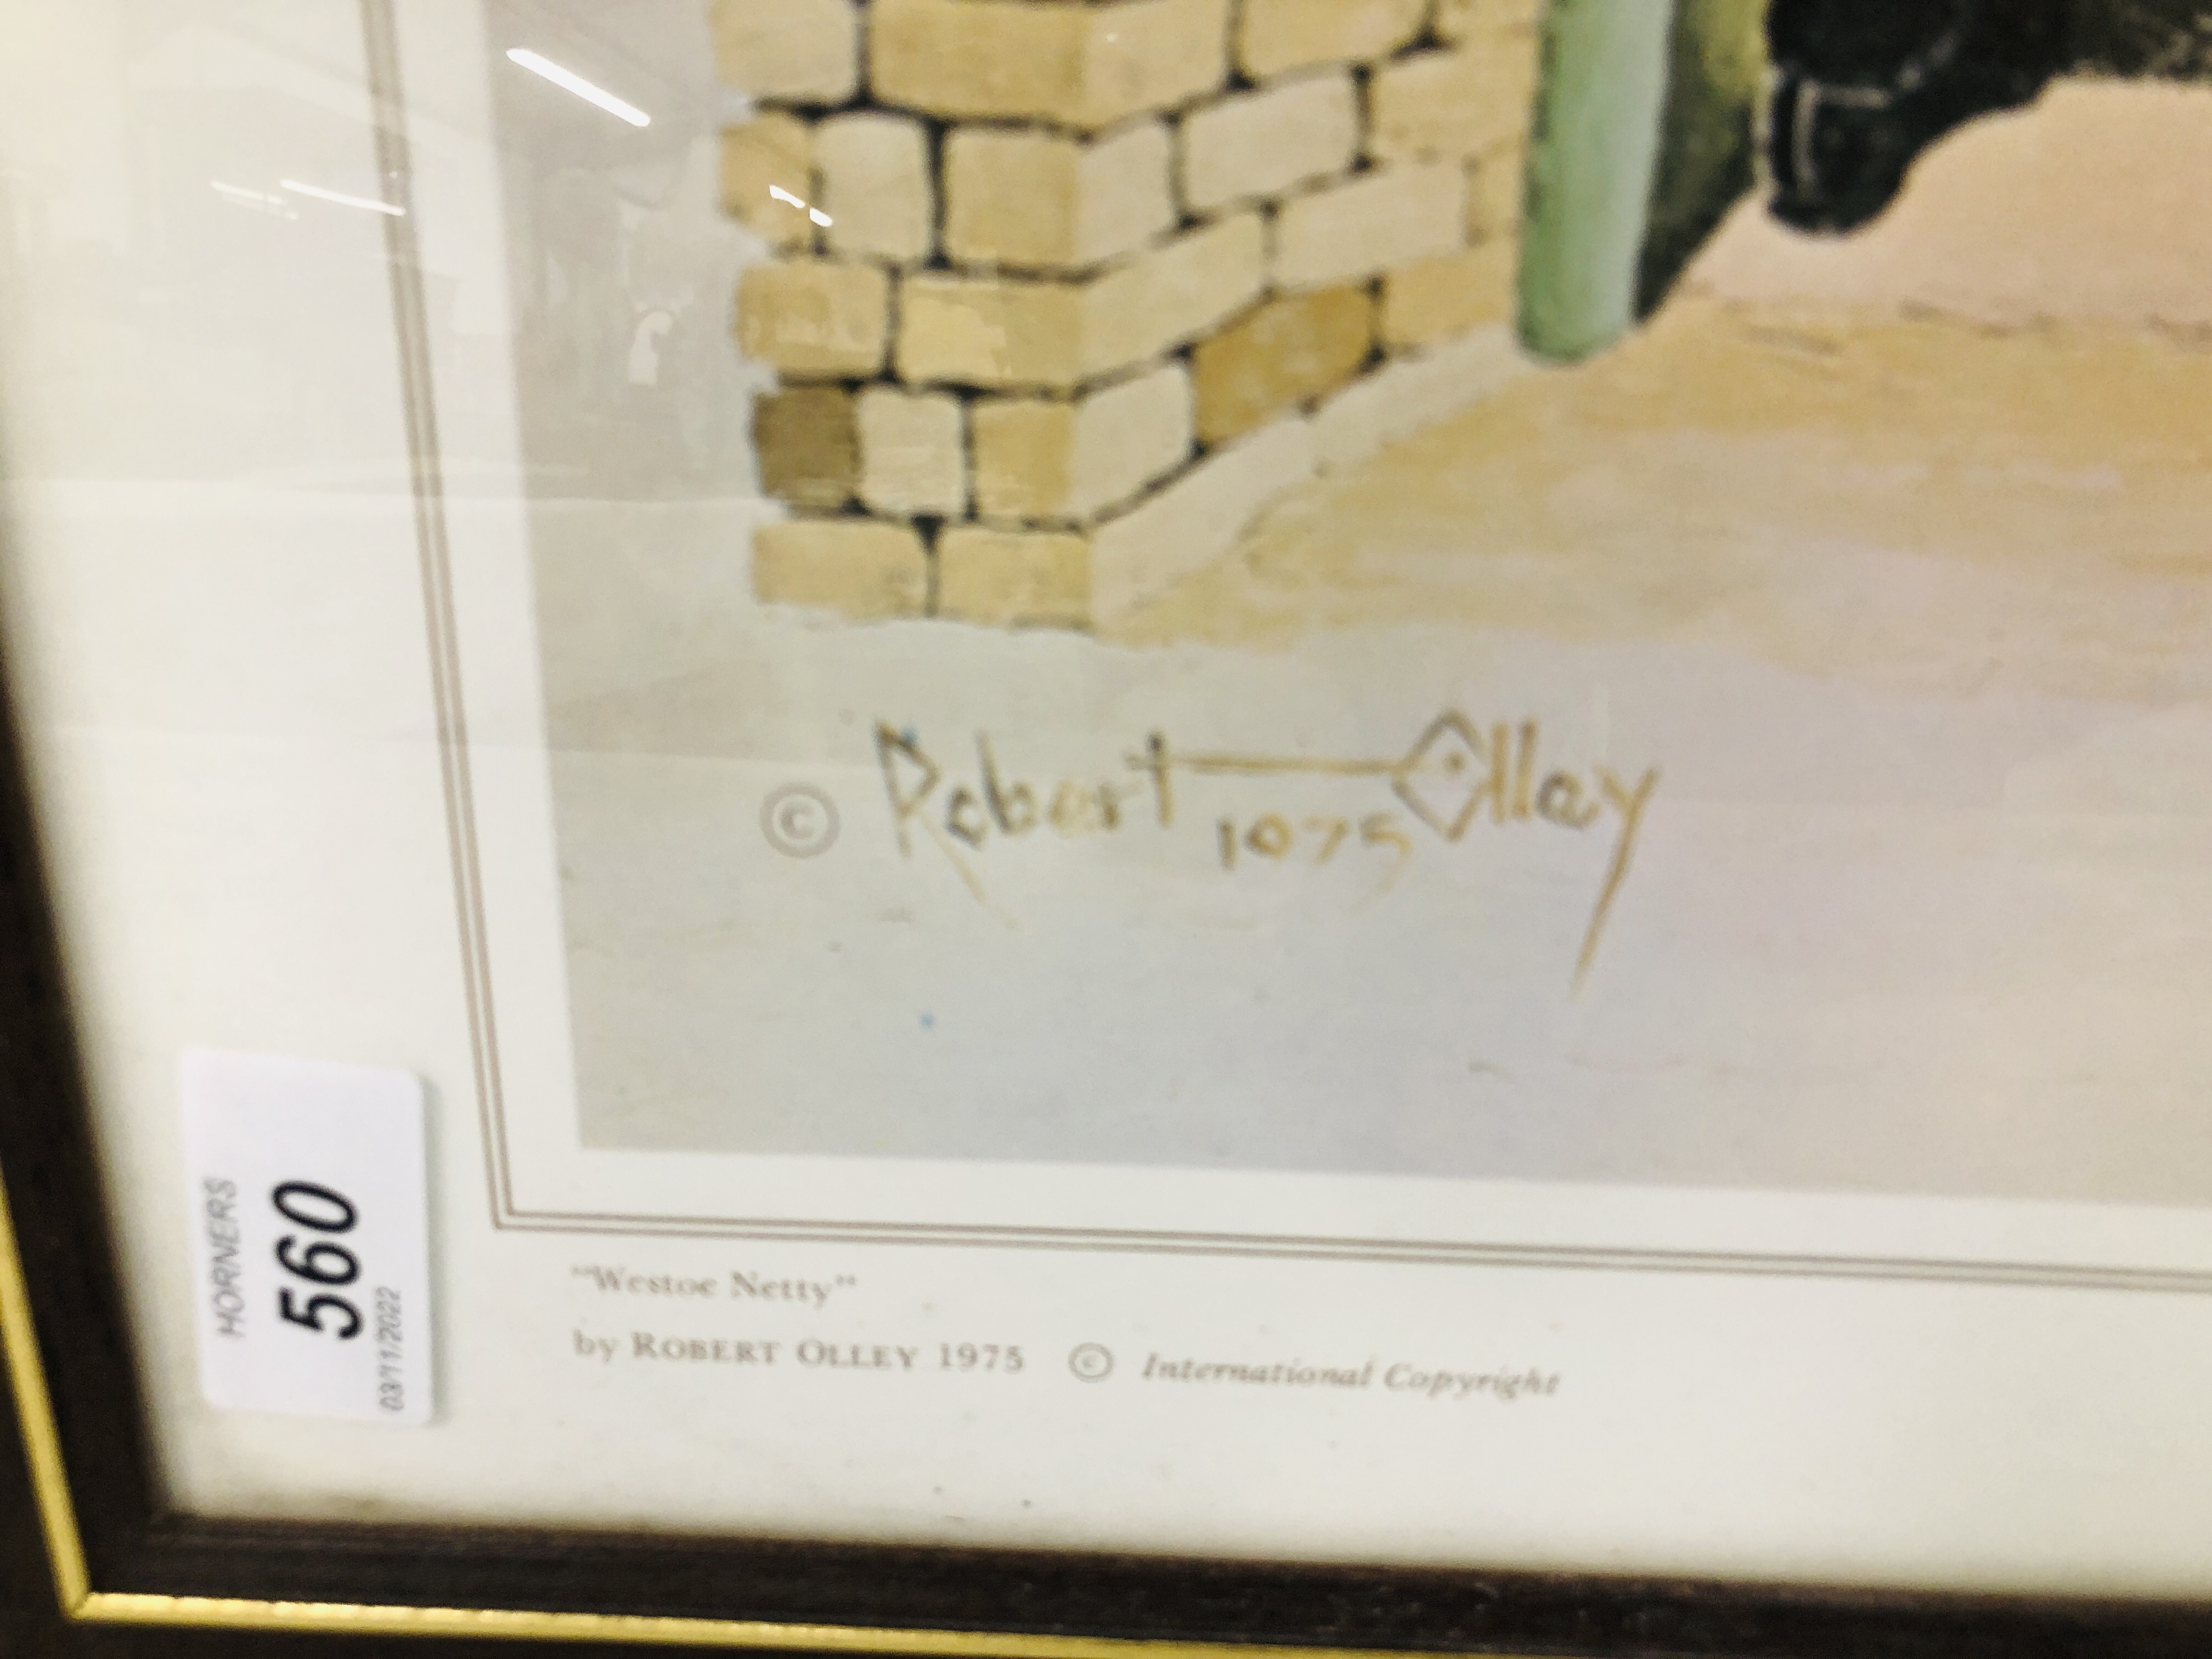 A FRAMED AND MOUNTED PRINT "WESTOE NETTY" BEARING SIGNATURE ROBERT OLLEY 1975. - Image 3 of 5